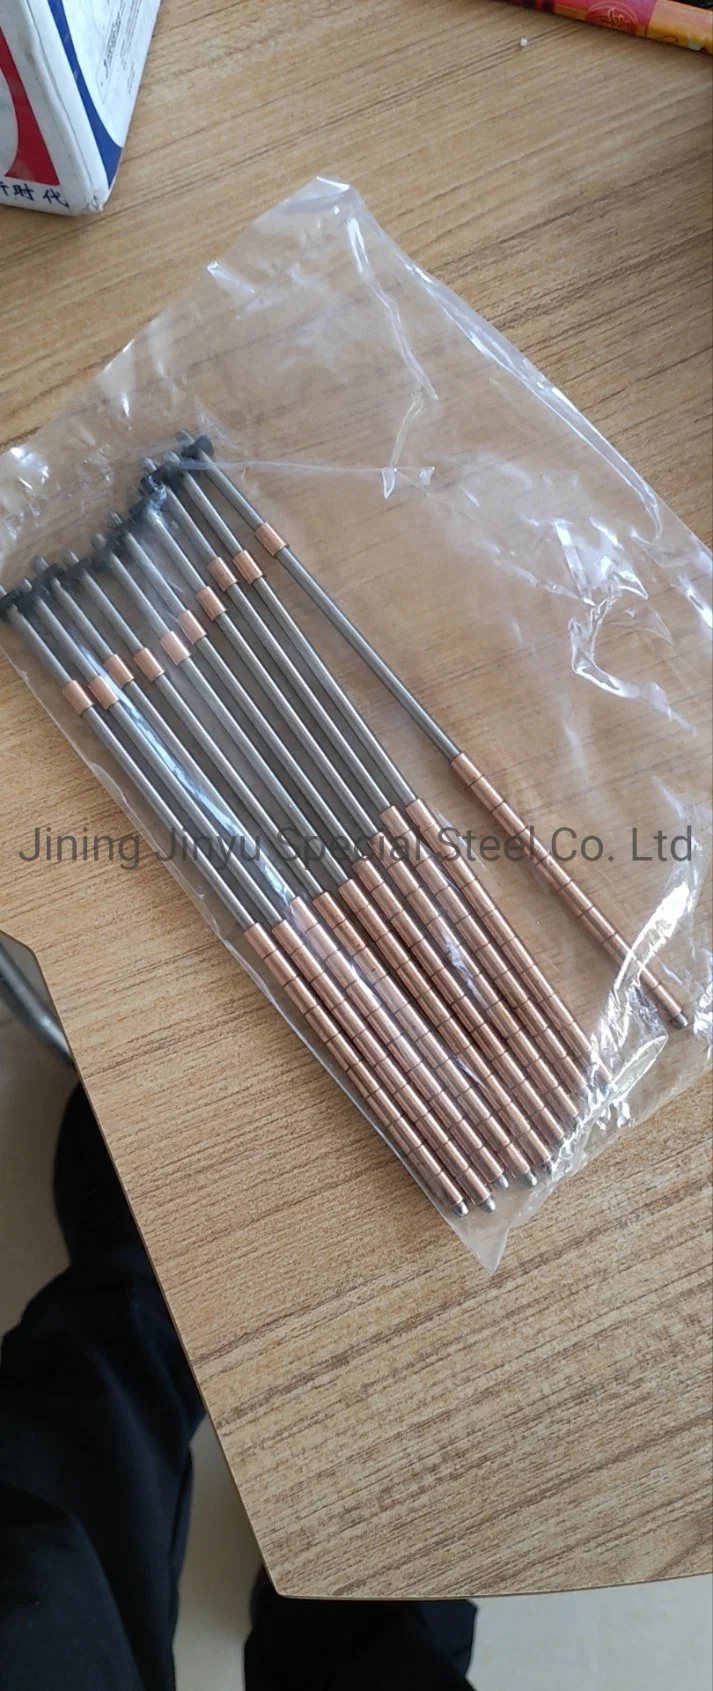 Bending Rods for Roller Rods with 19 Brass Bushings for MDF Refiner Mill